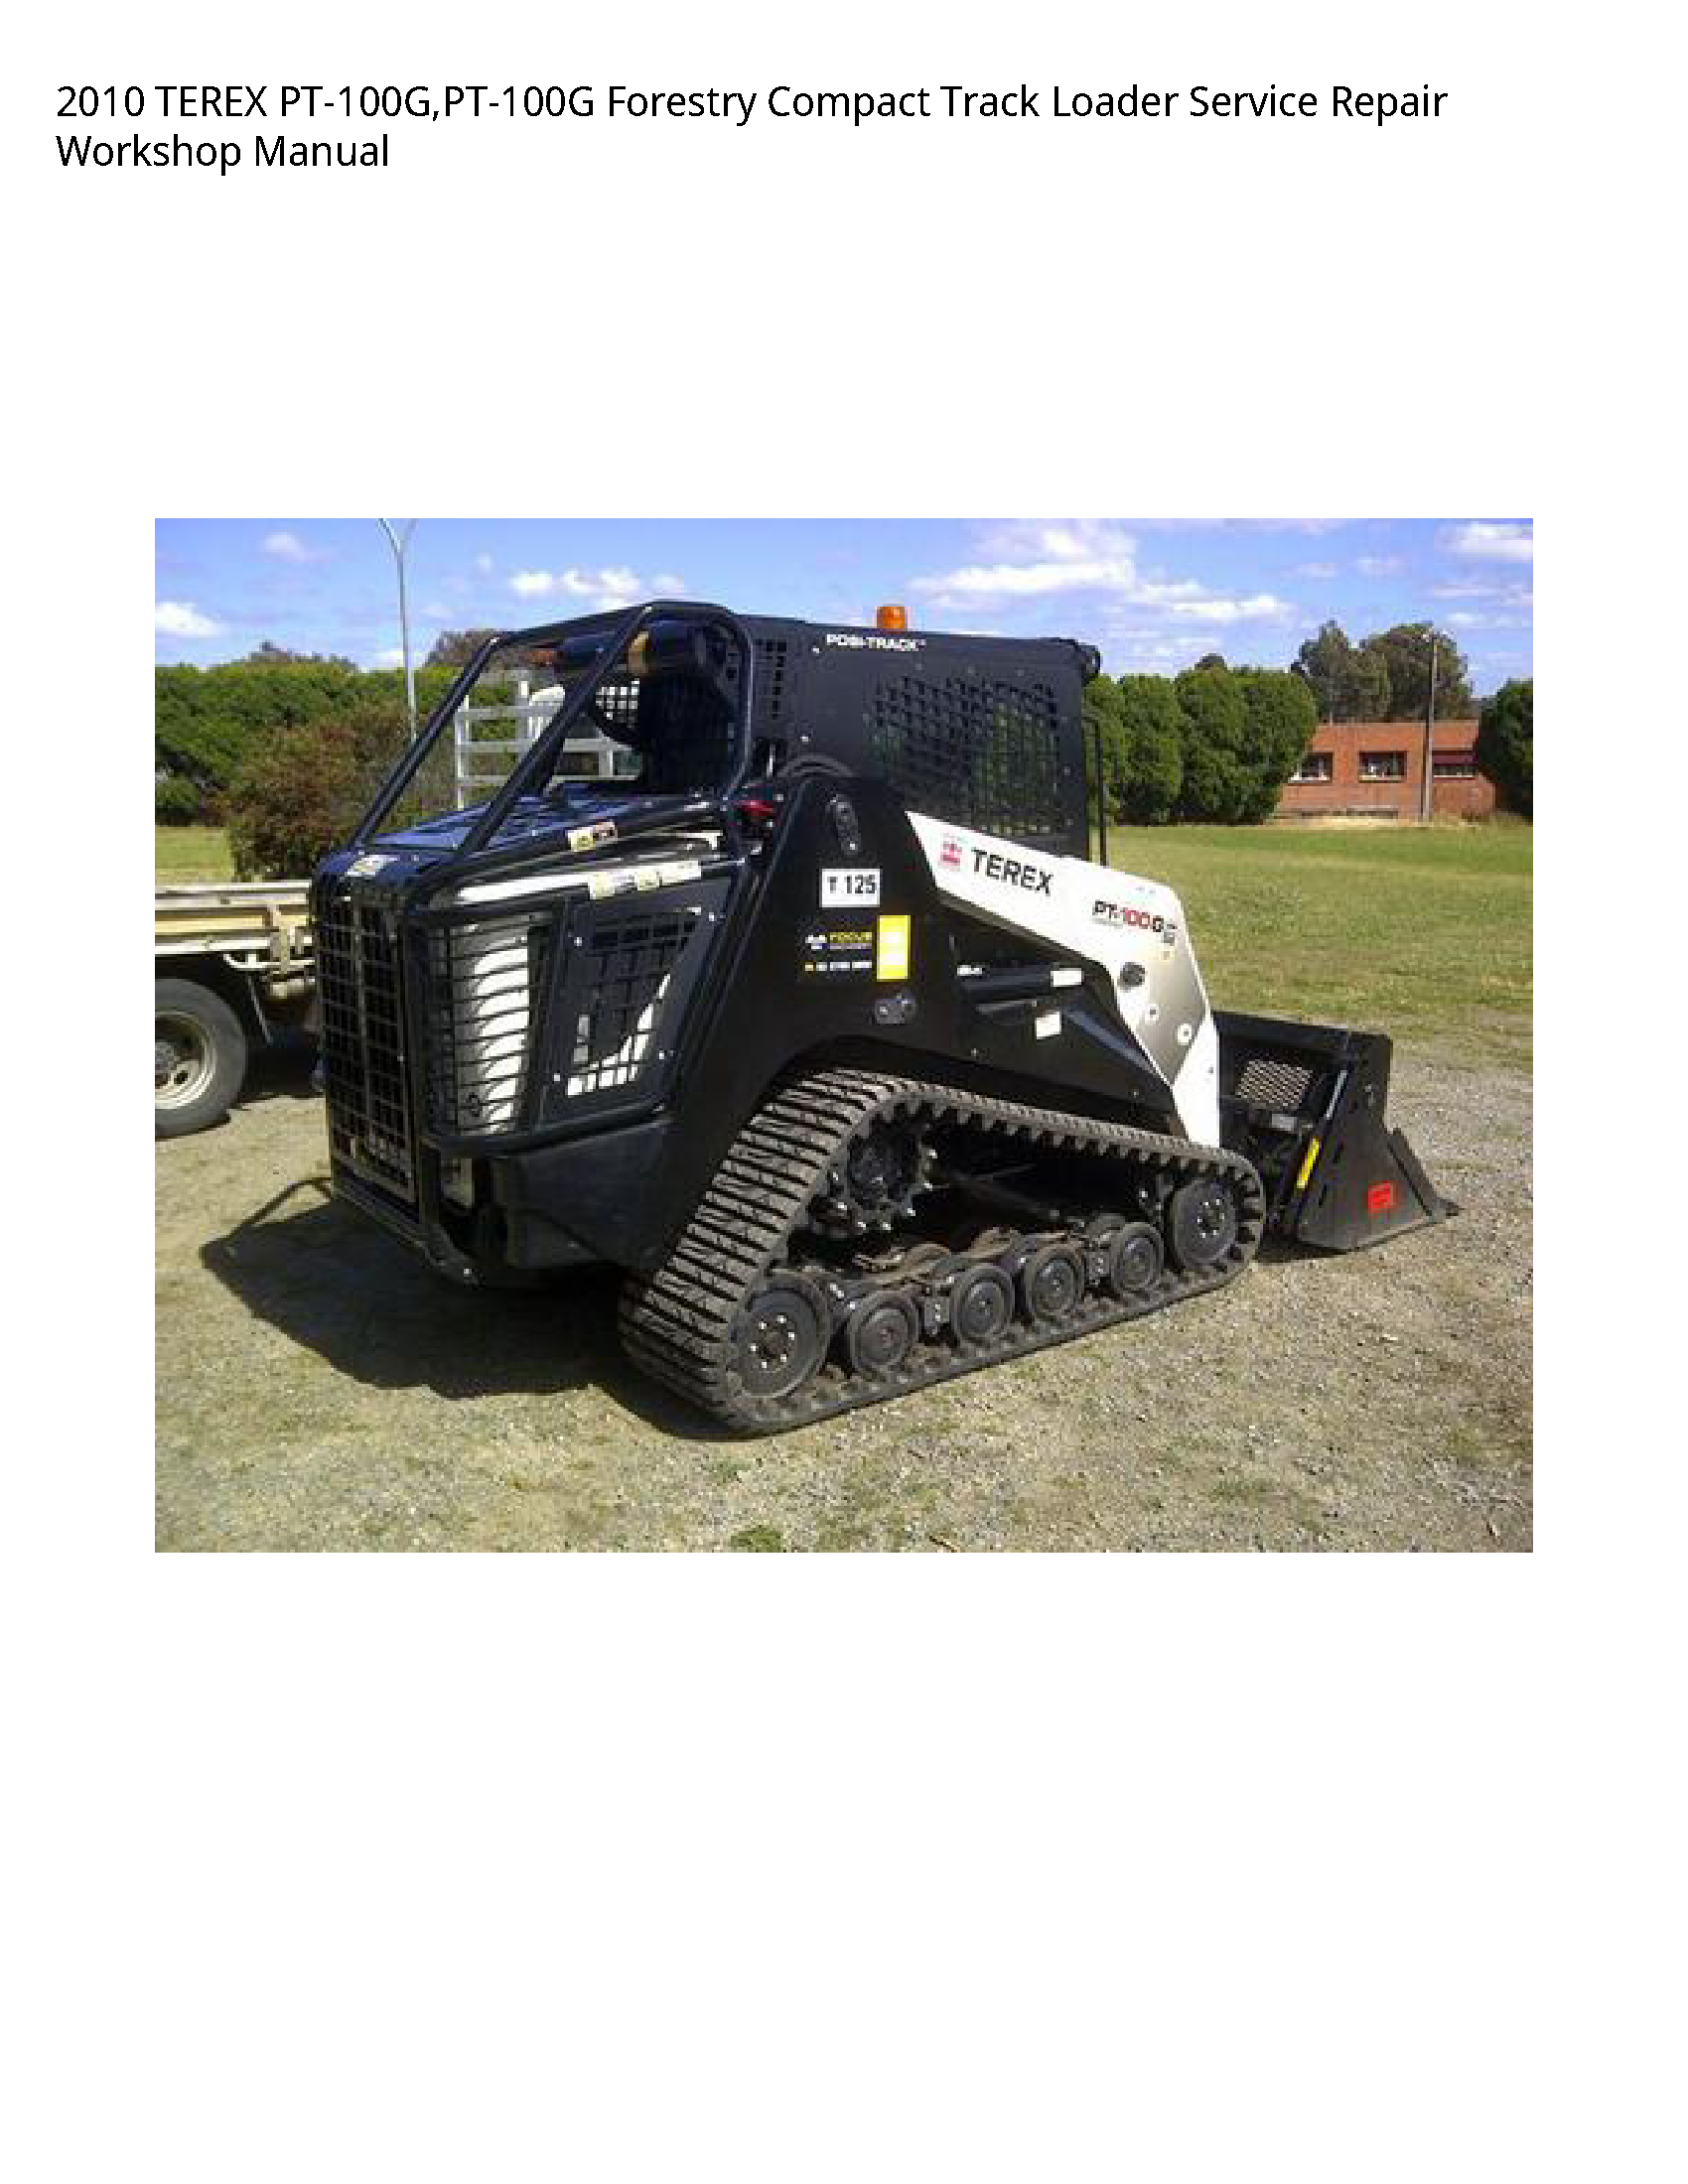 Terex PT-100G Forestry Compact Track Loader manual